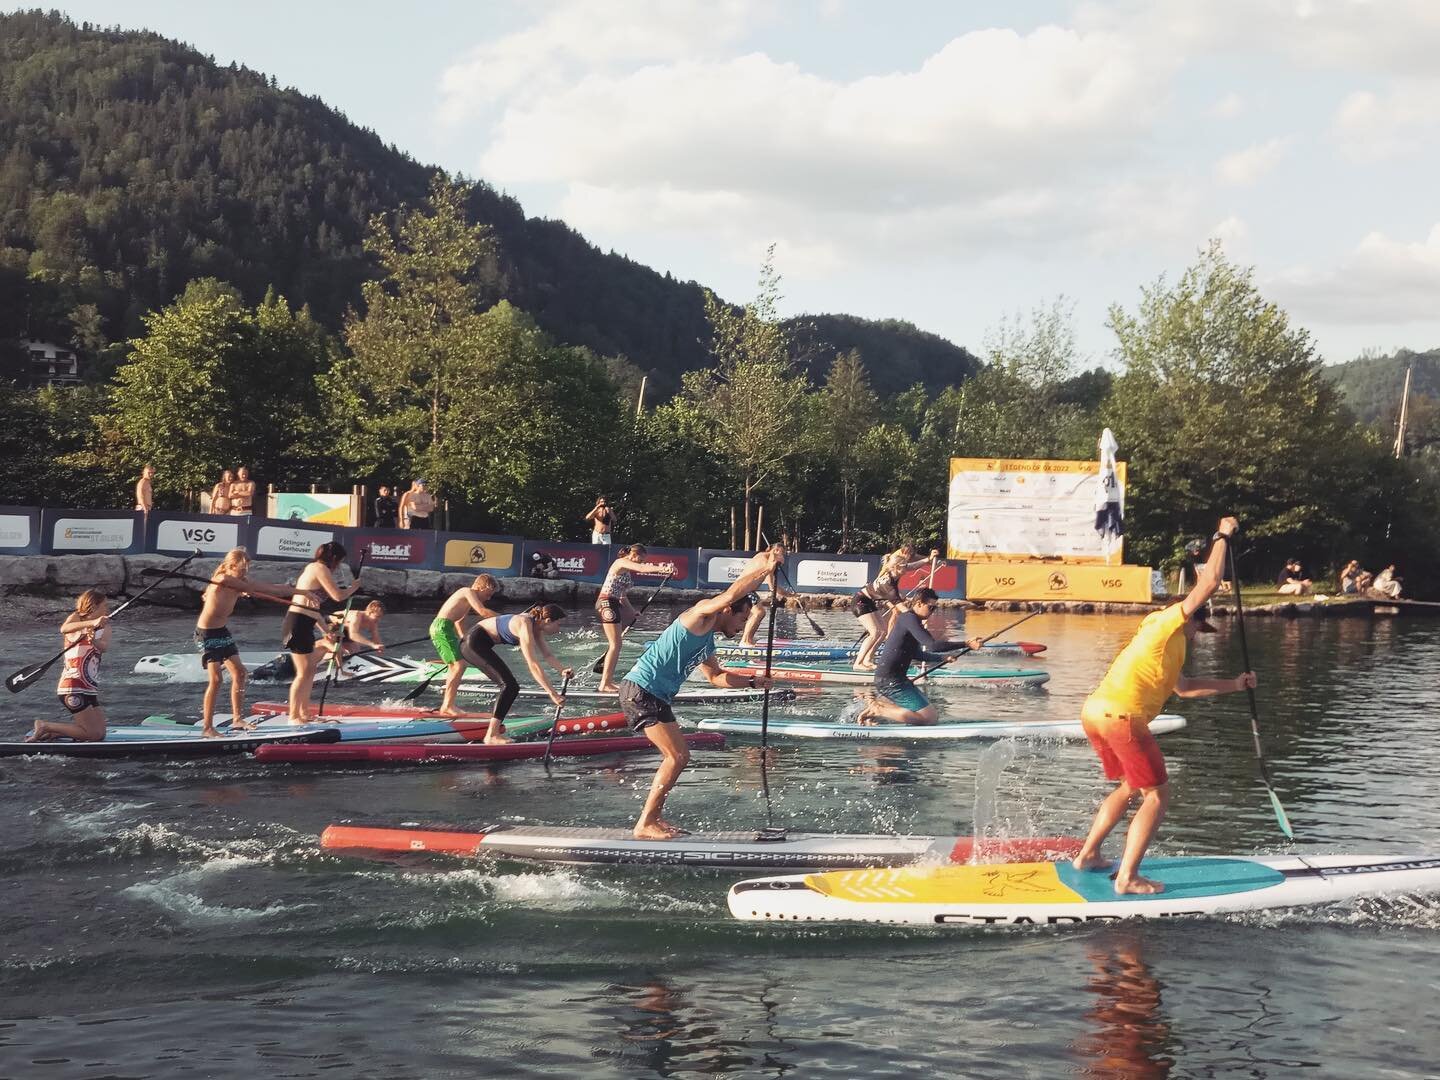 It was GREAT!
.
Legend of Ox 2022 in St. Gilgen - @wolfgangsee! 
.
We are so lucky and finally proud of paddling on the 🥈 place in the team challenge! 
.
Thx @mtt.cerutti, @marquisetta and Rainer for giving all 💪🏽! 
.
And great applause to every s